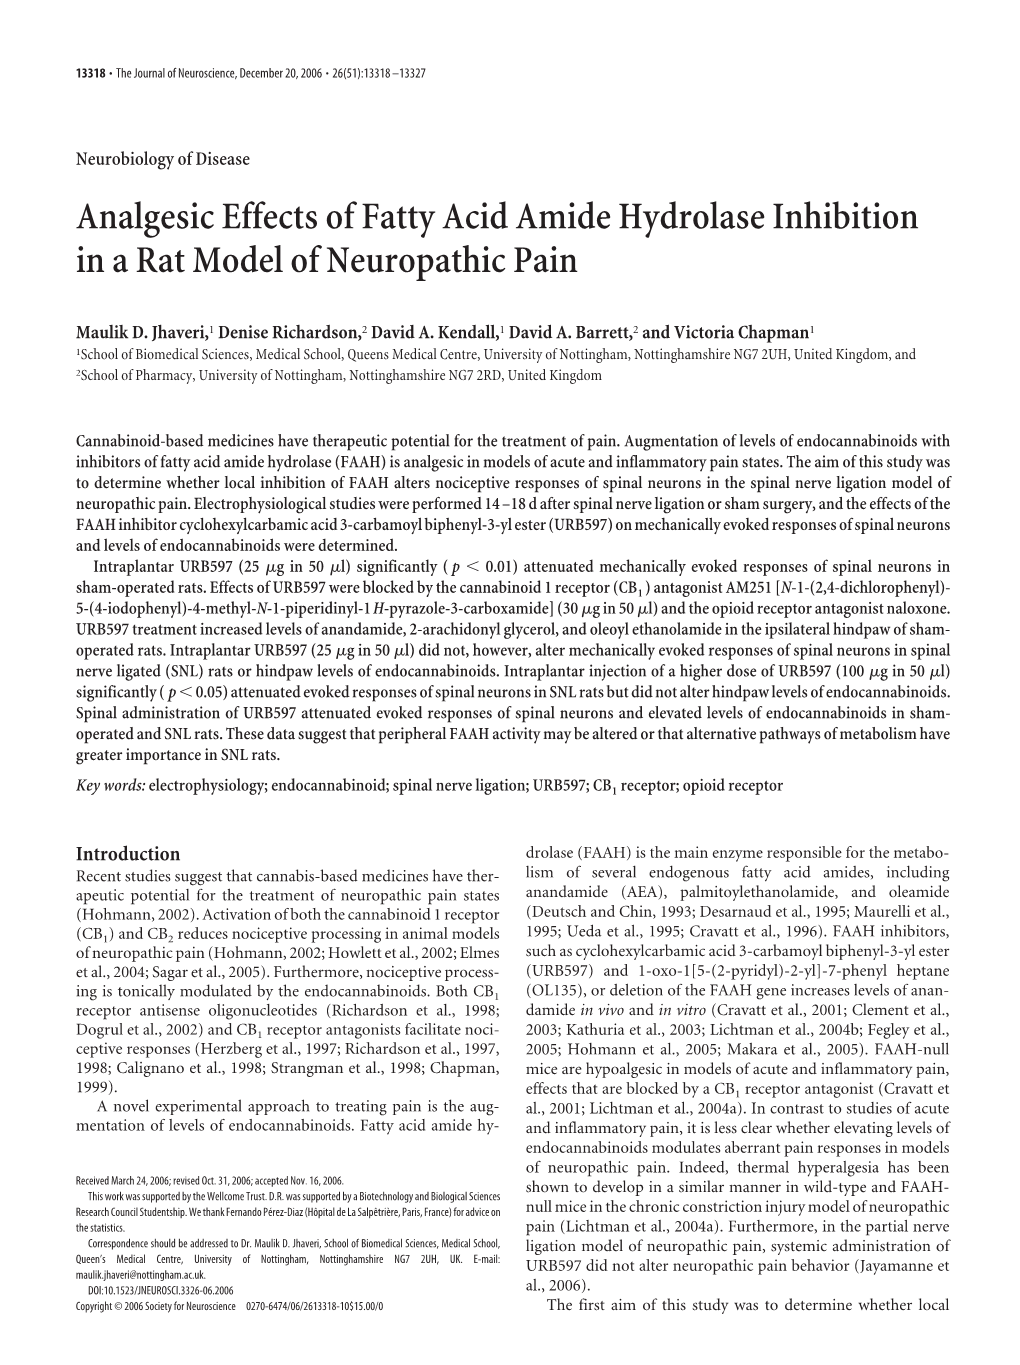 Analgesic Effects of Fatty Acid Amide Hydrolase Inhibition in a Rat Model of Neuropathic Pain